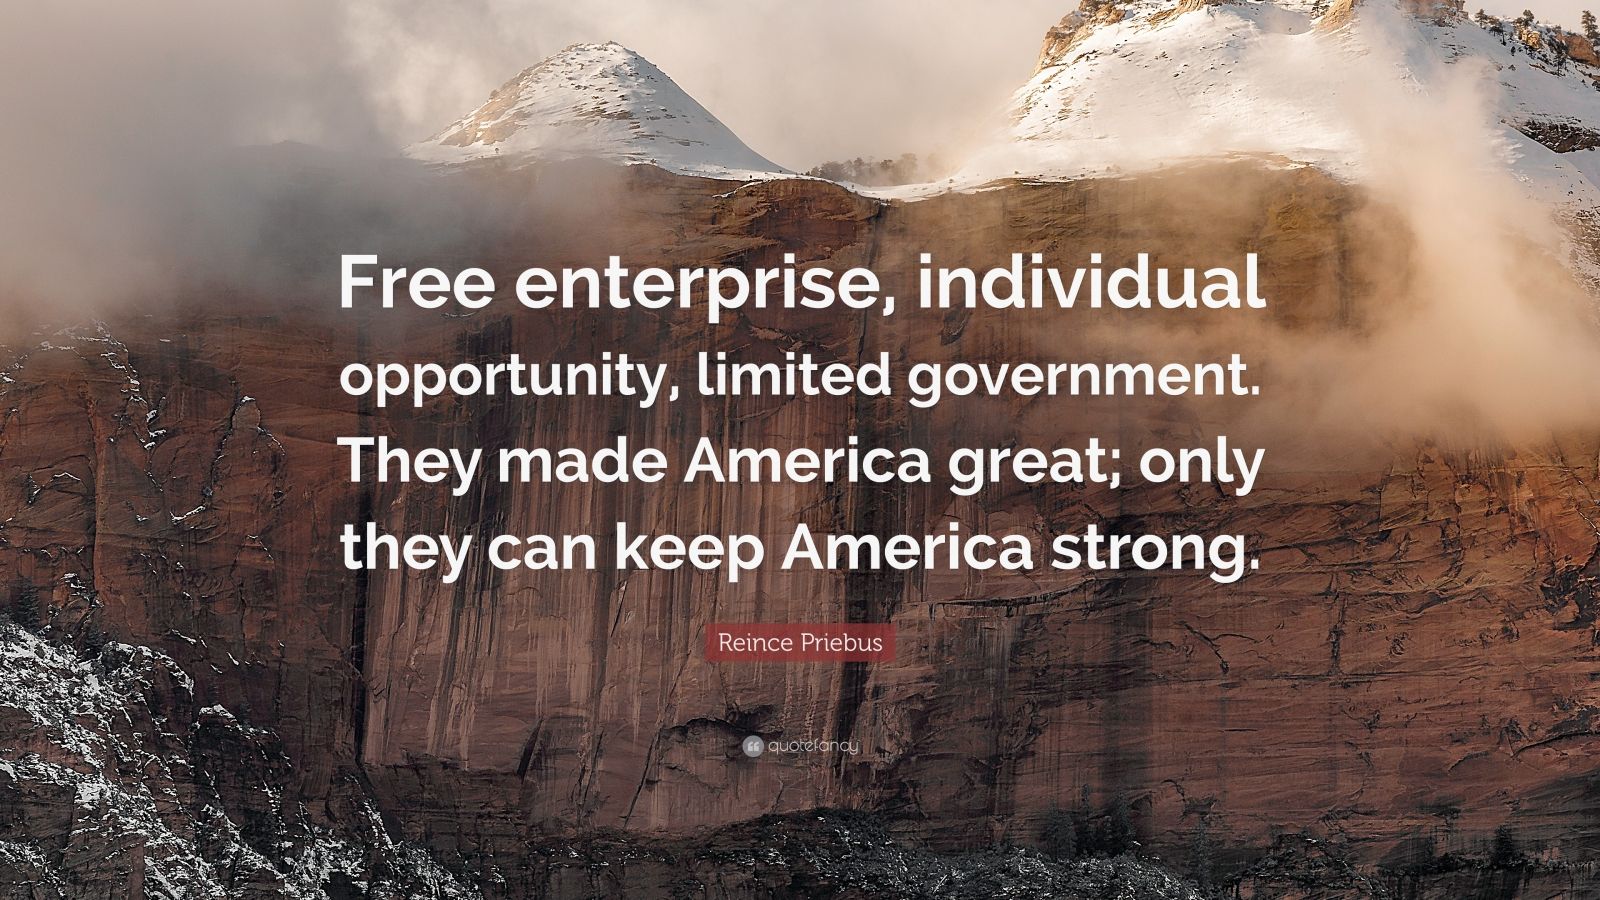 Reince Priebus Quote “Free enterprise, individual opportunity, limited